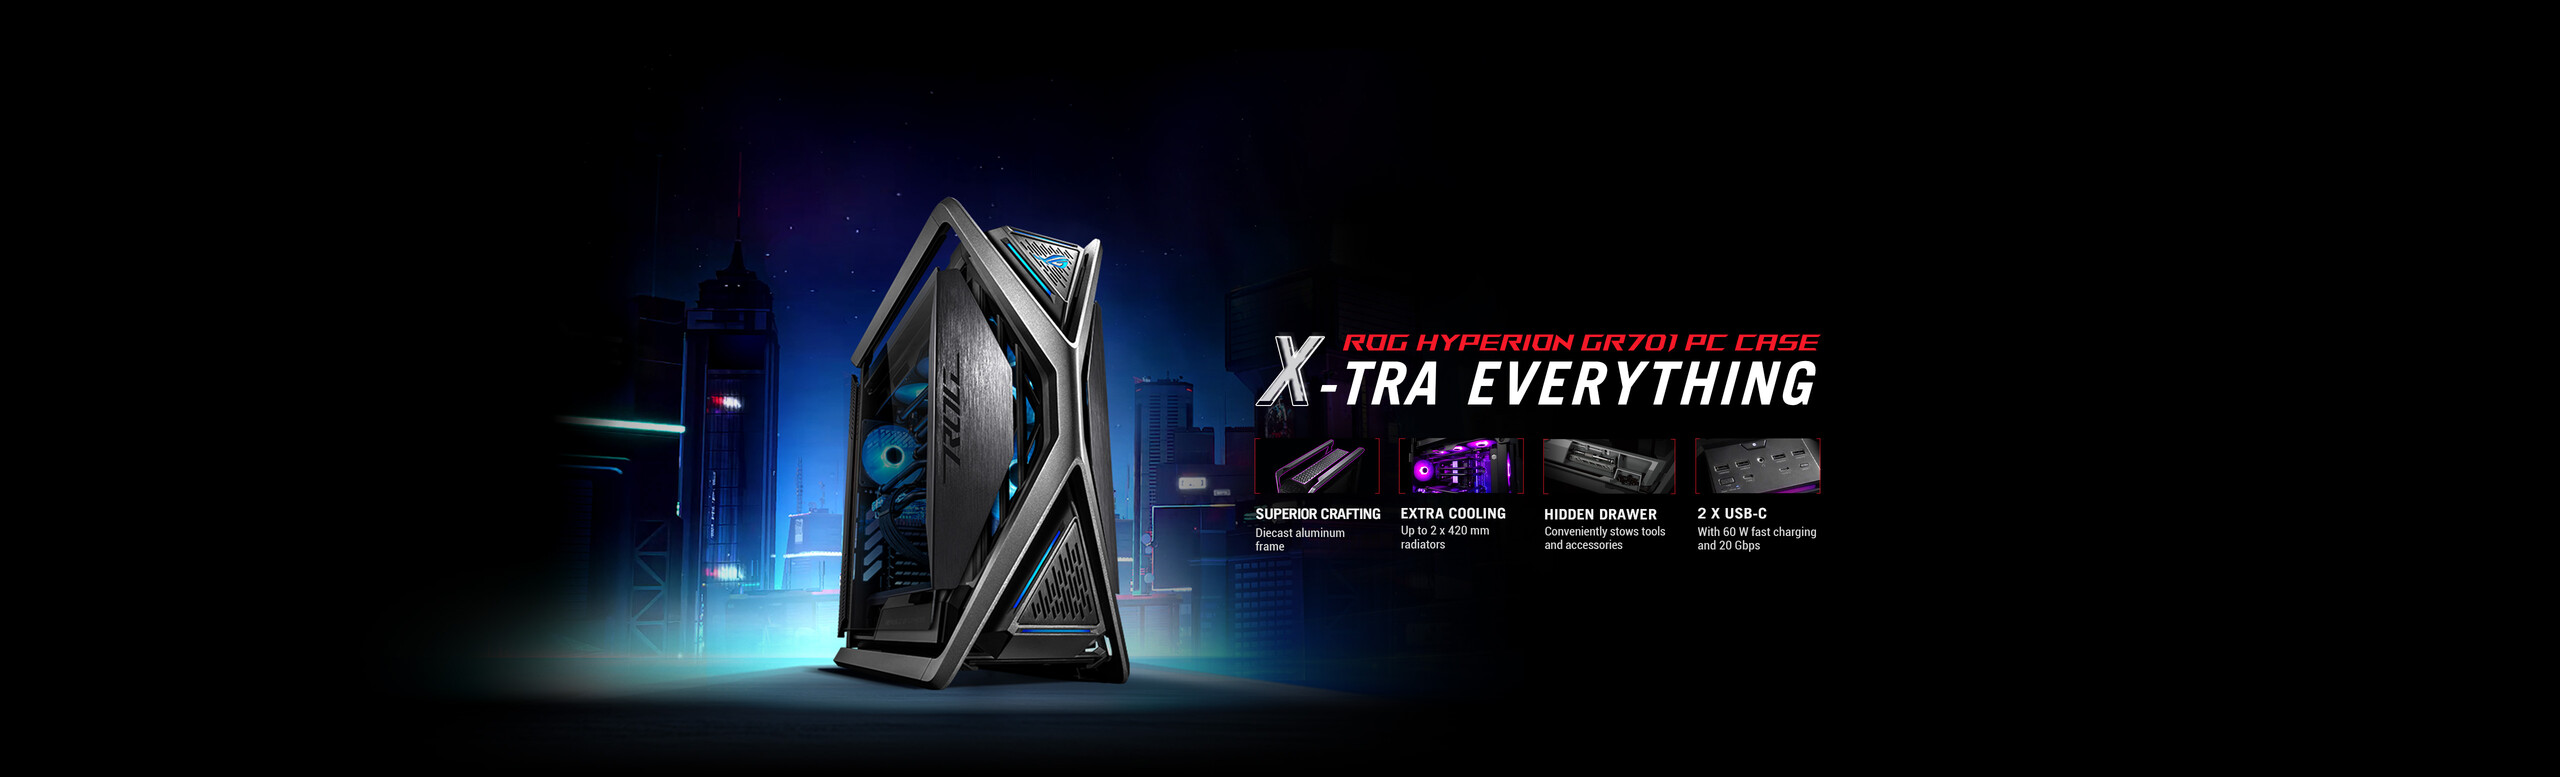 Learn more about ROG Hyperion GR701 PC Case Banner